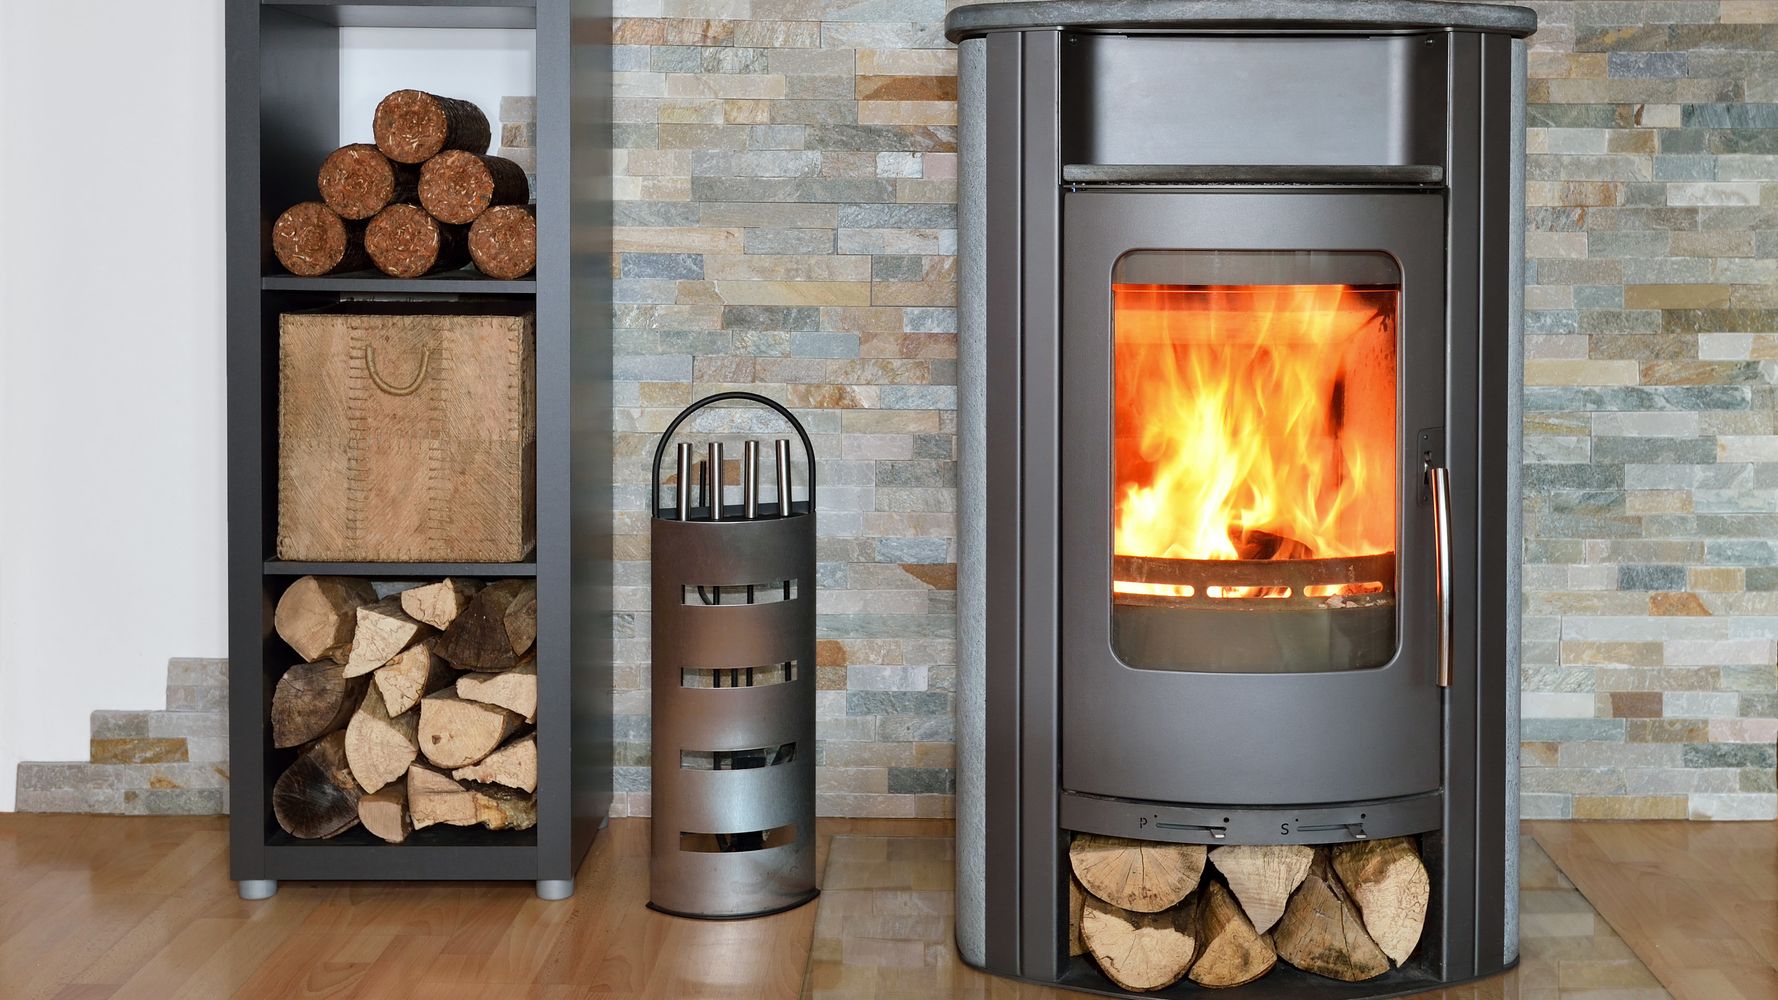 Are Log Burners Bad for the Environment?